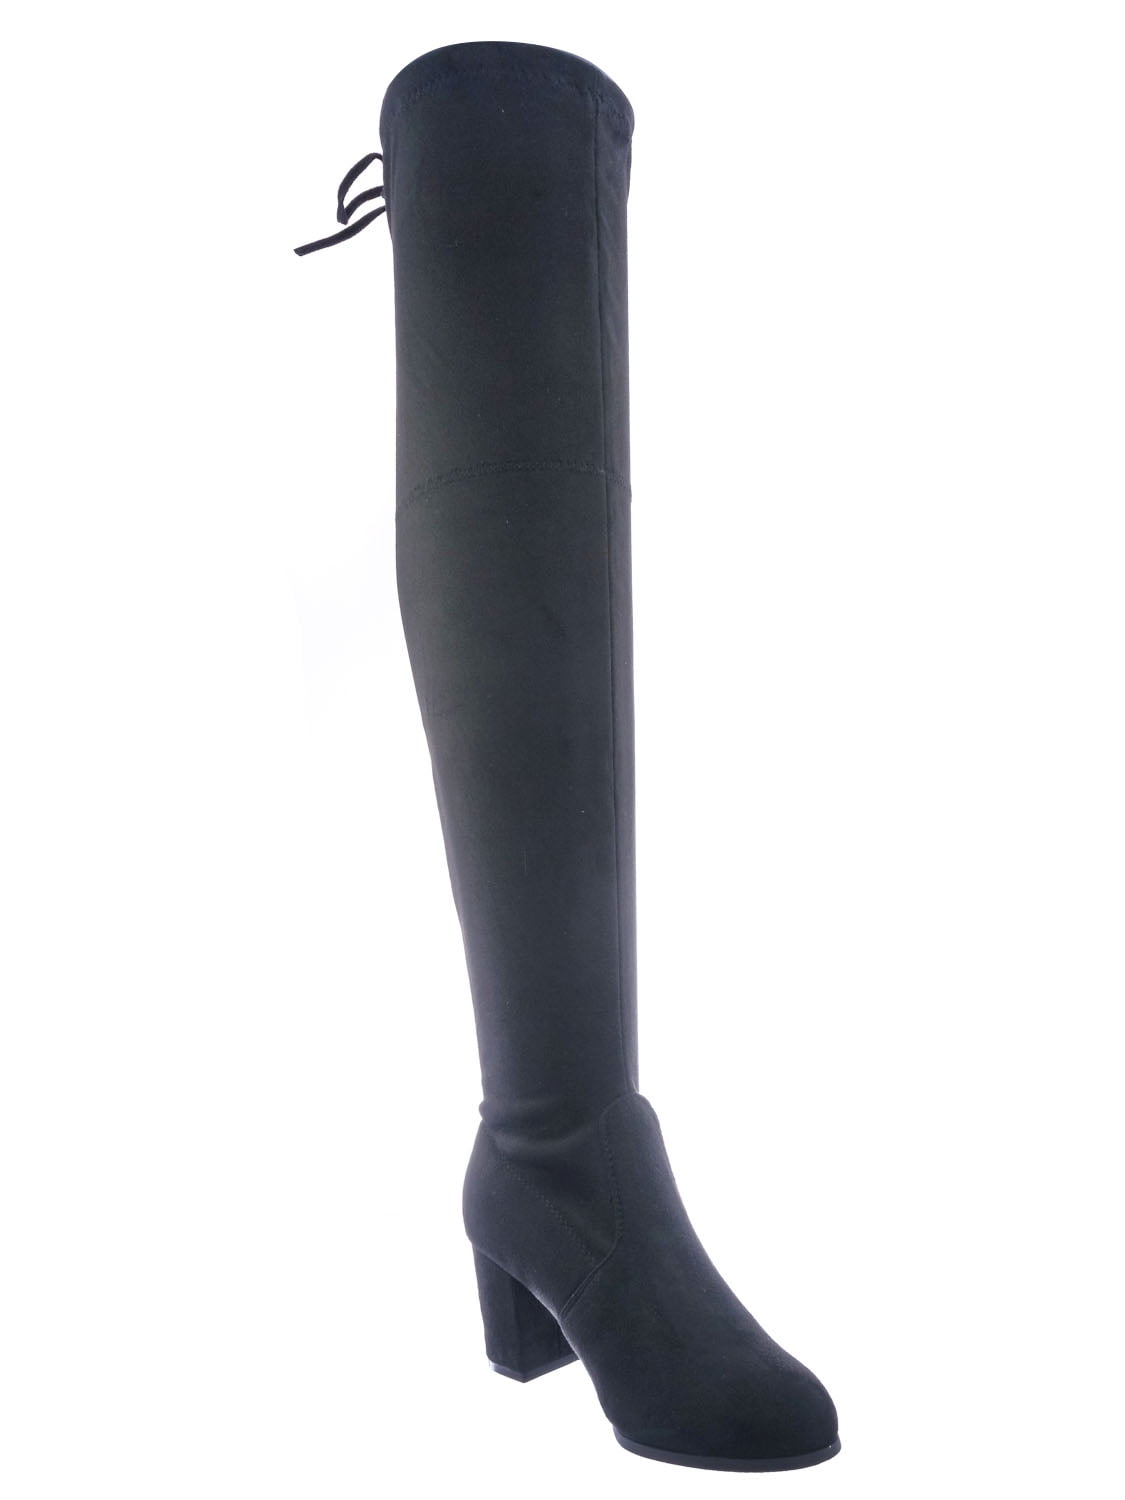 Women Lace Up Mid High Heel Riding Long Boots Ladies Suede Tall OTK Shoes Winter 